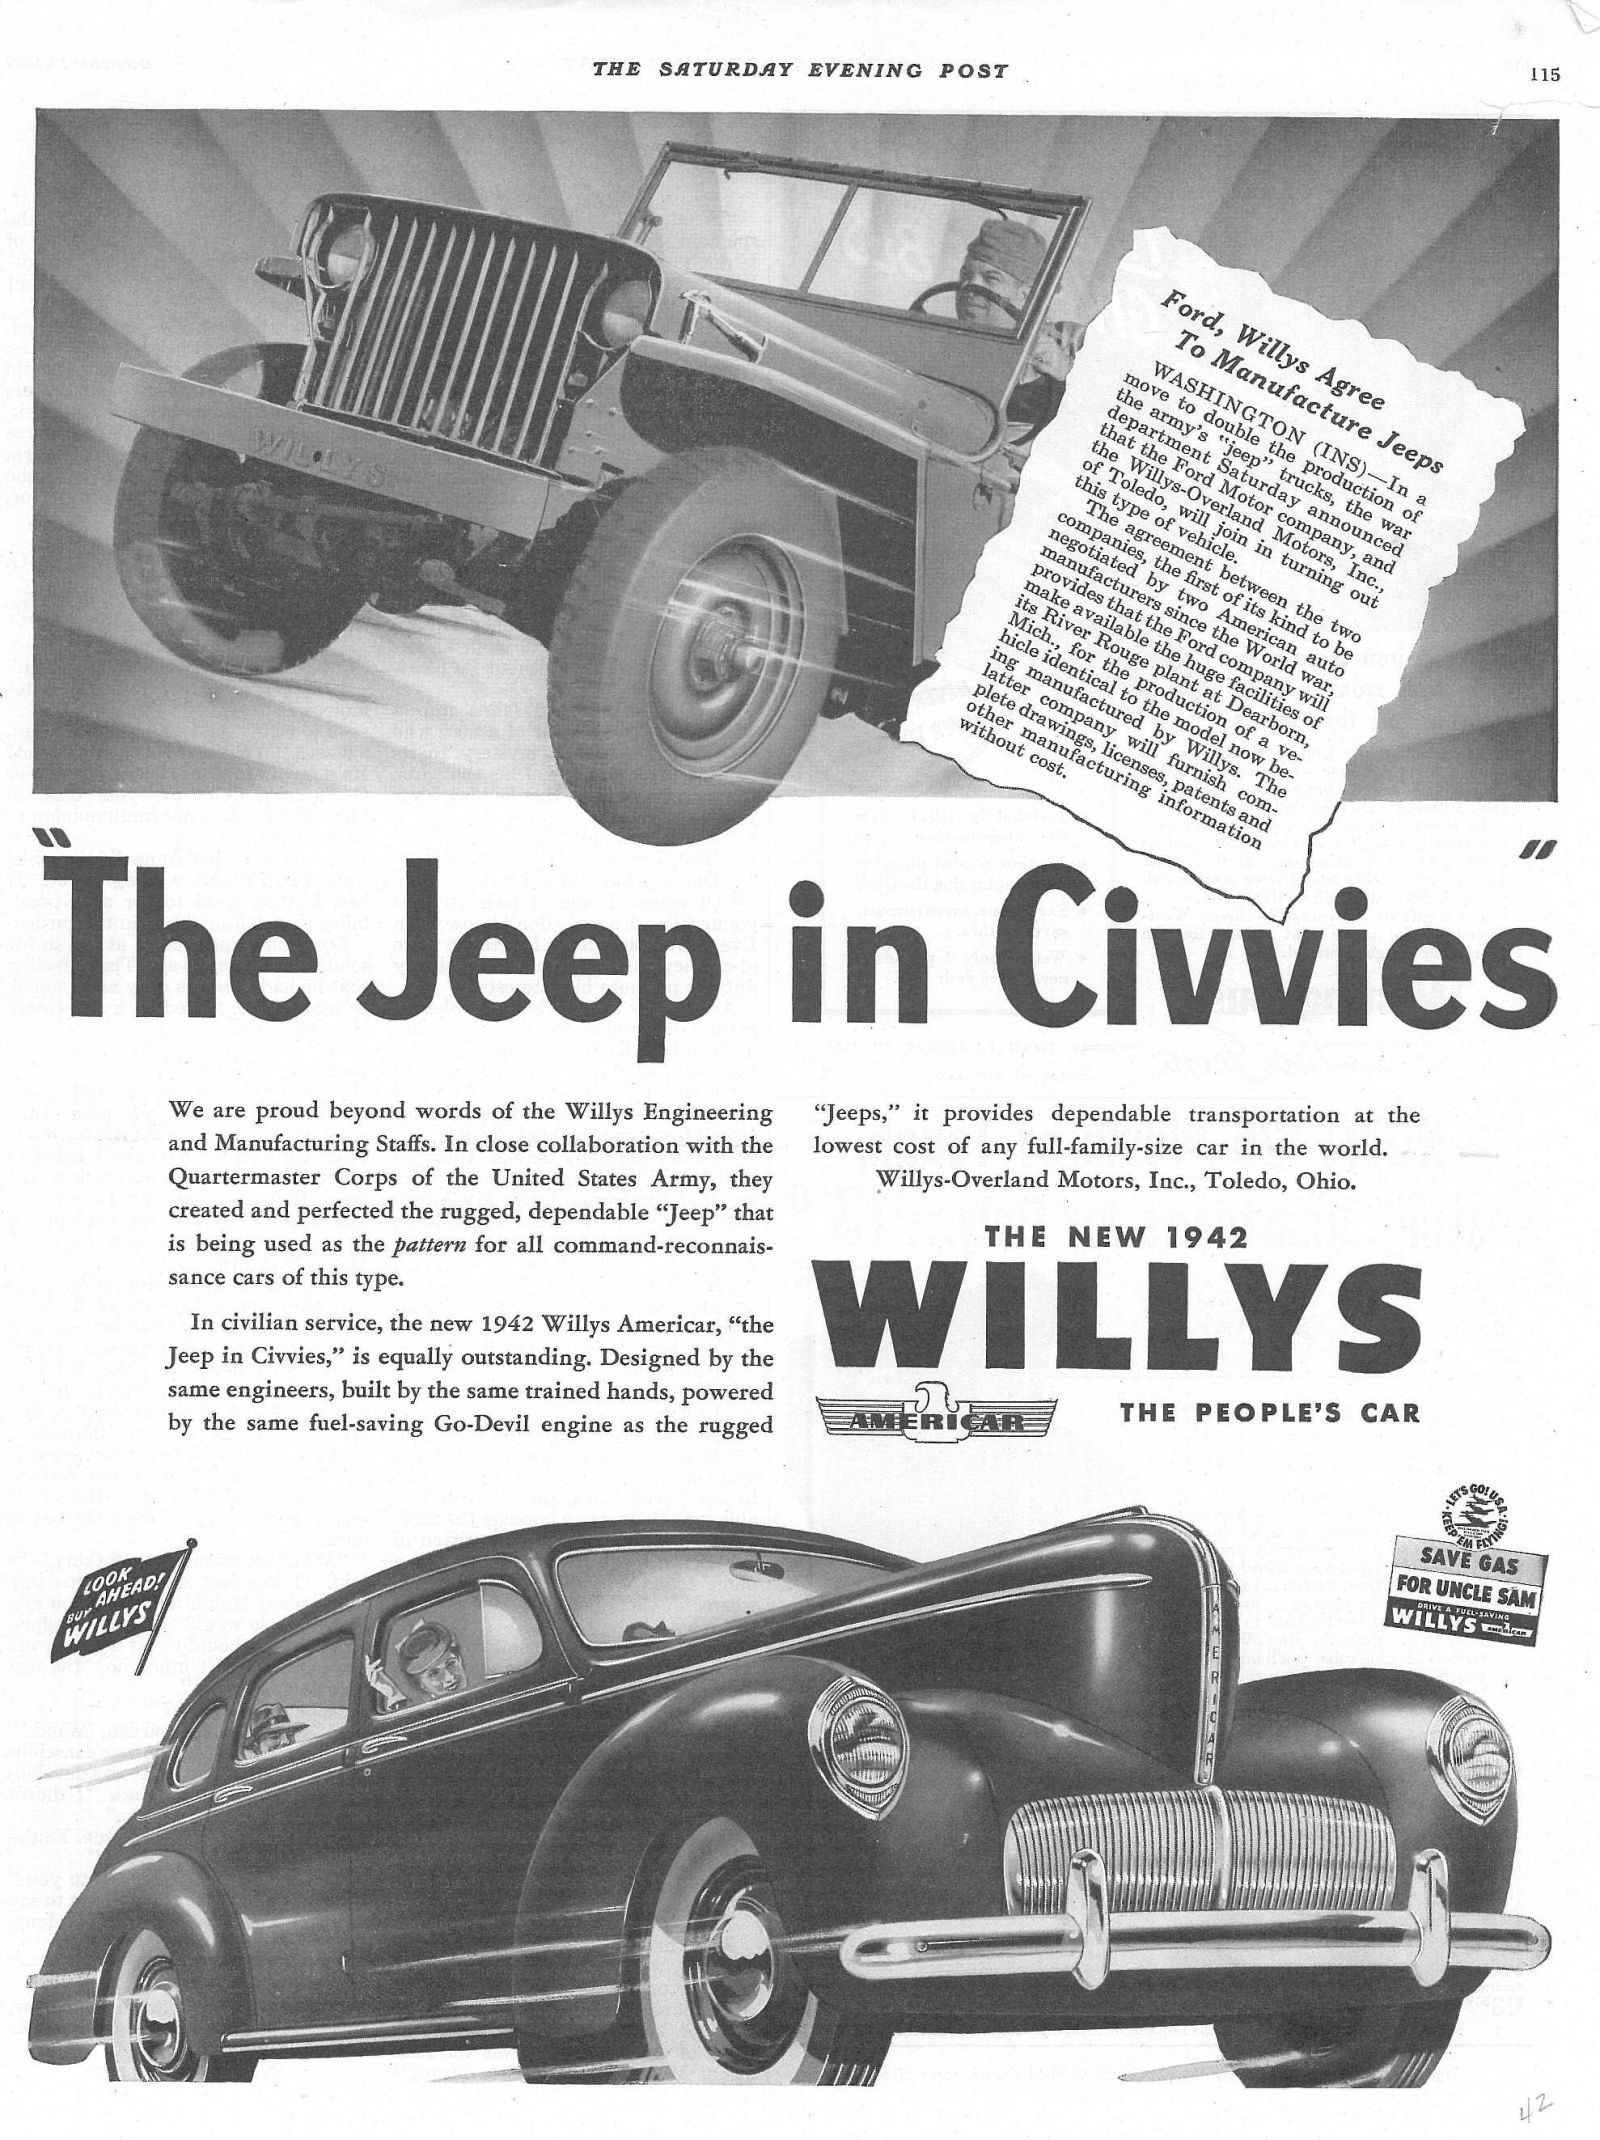 Two particularly noteworthy aspects to this ad: notice the pre-Ford-reworked grille, and where have we seen “The People’s Car” before?